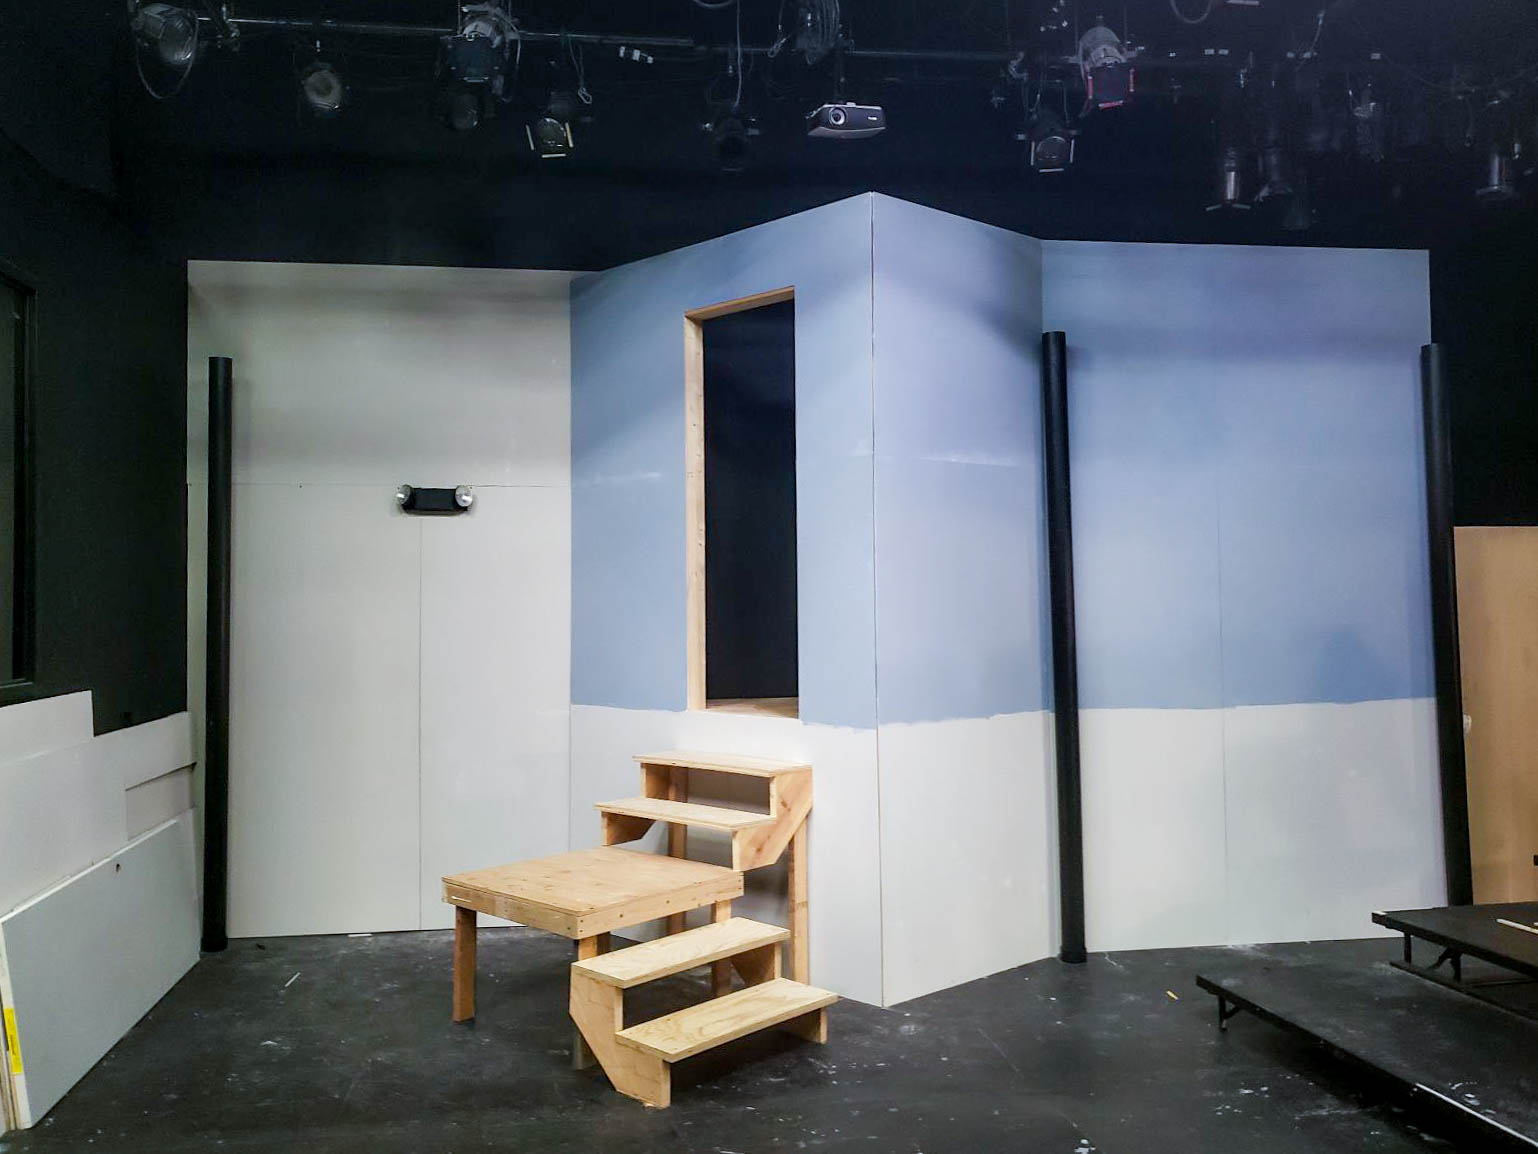 The set of Honestly, I’ve Never Wanted to Bash Someone in the Head with a Baseball Bat More Than I Do Right Now by Morgan Gould in progress. Photo by: Sharisse Taylor